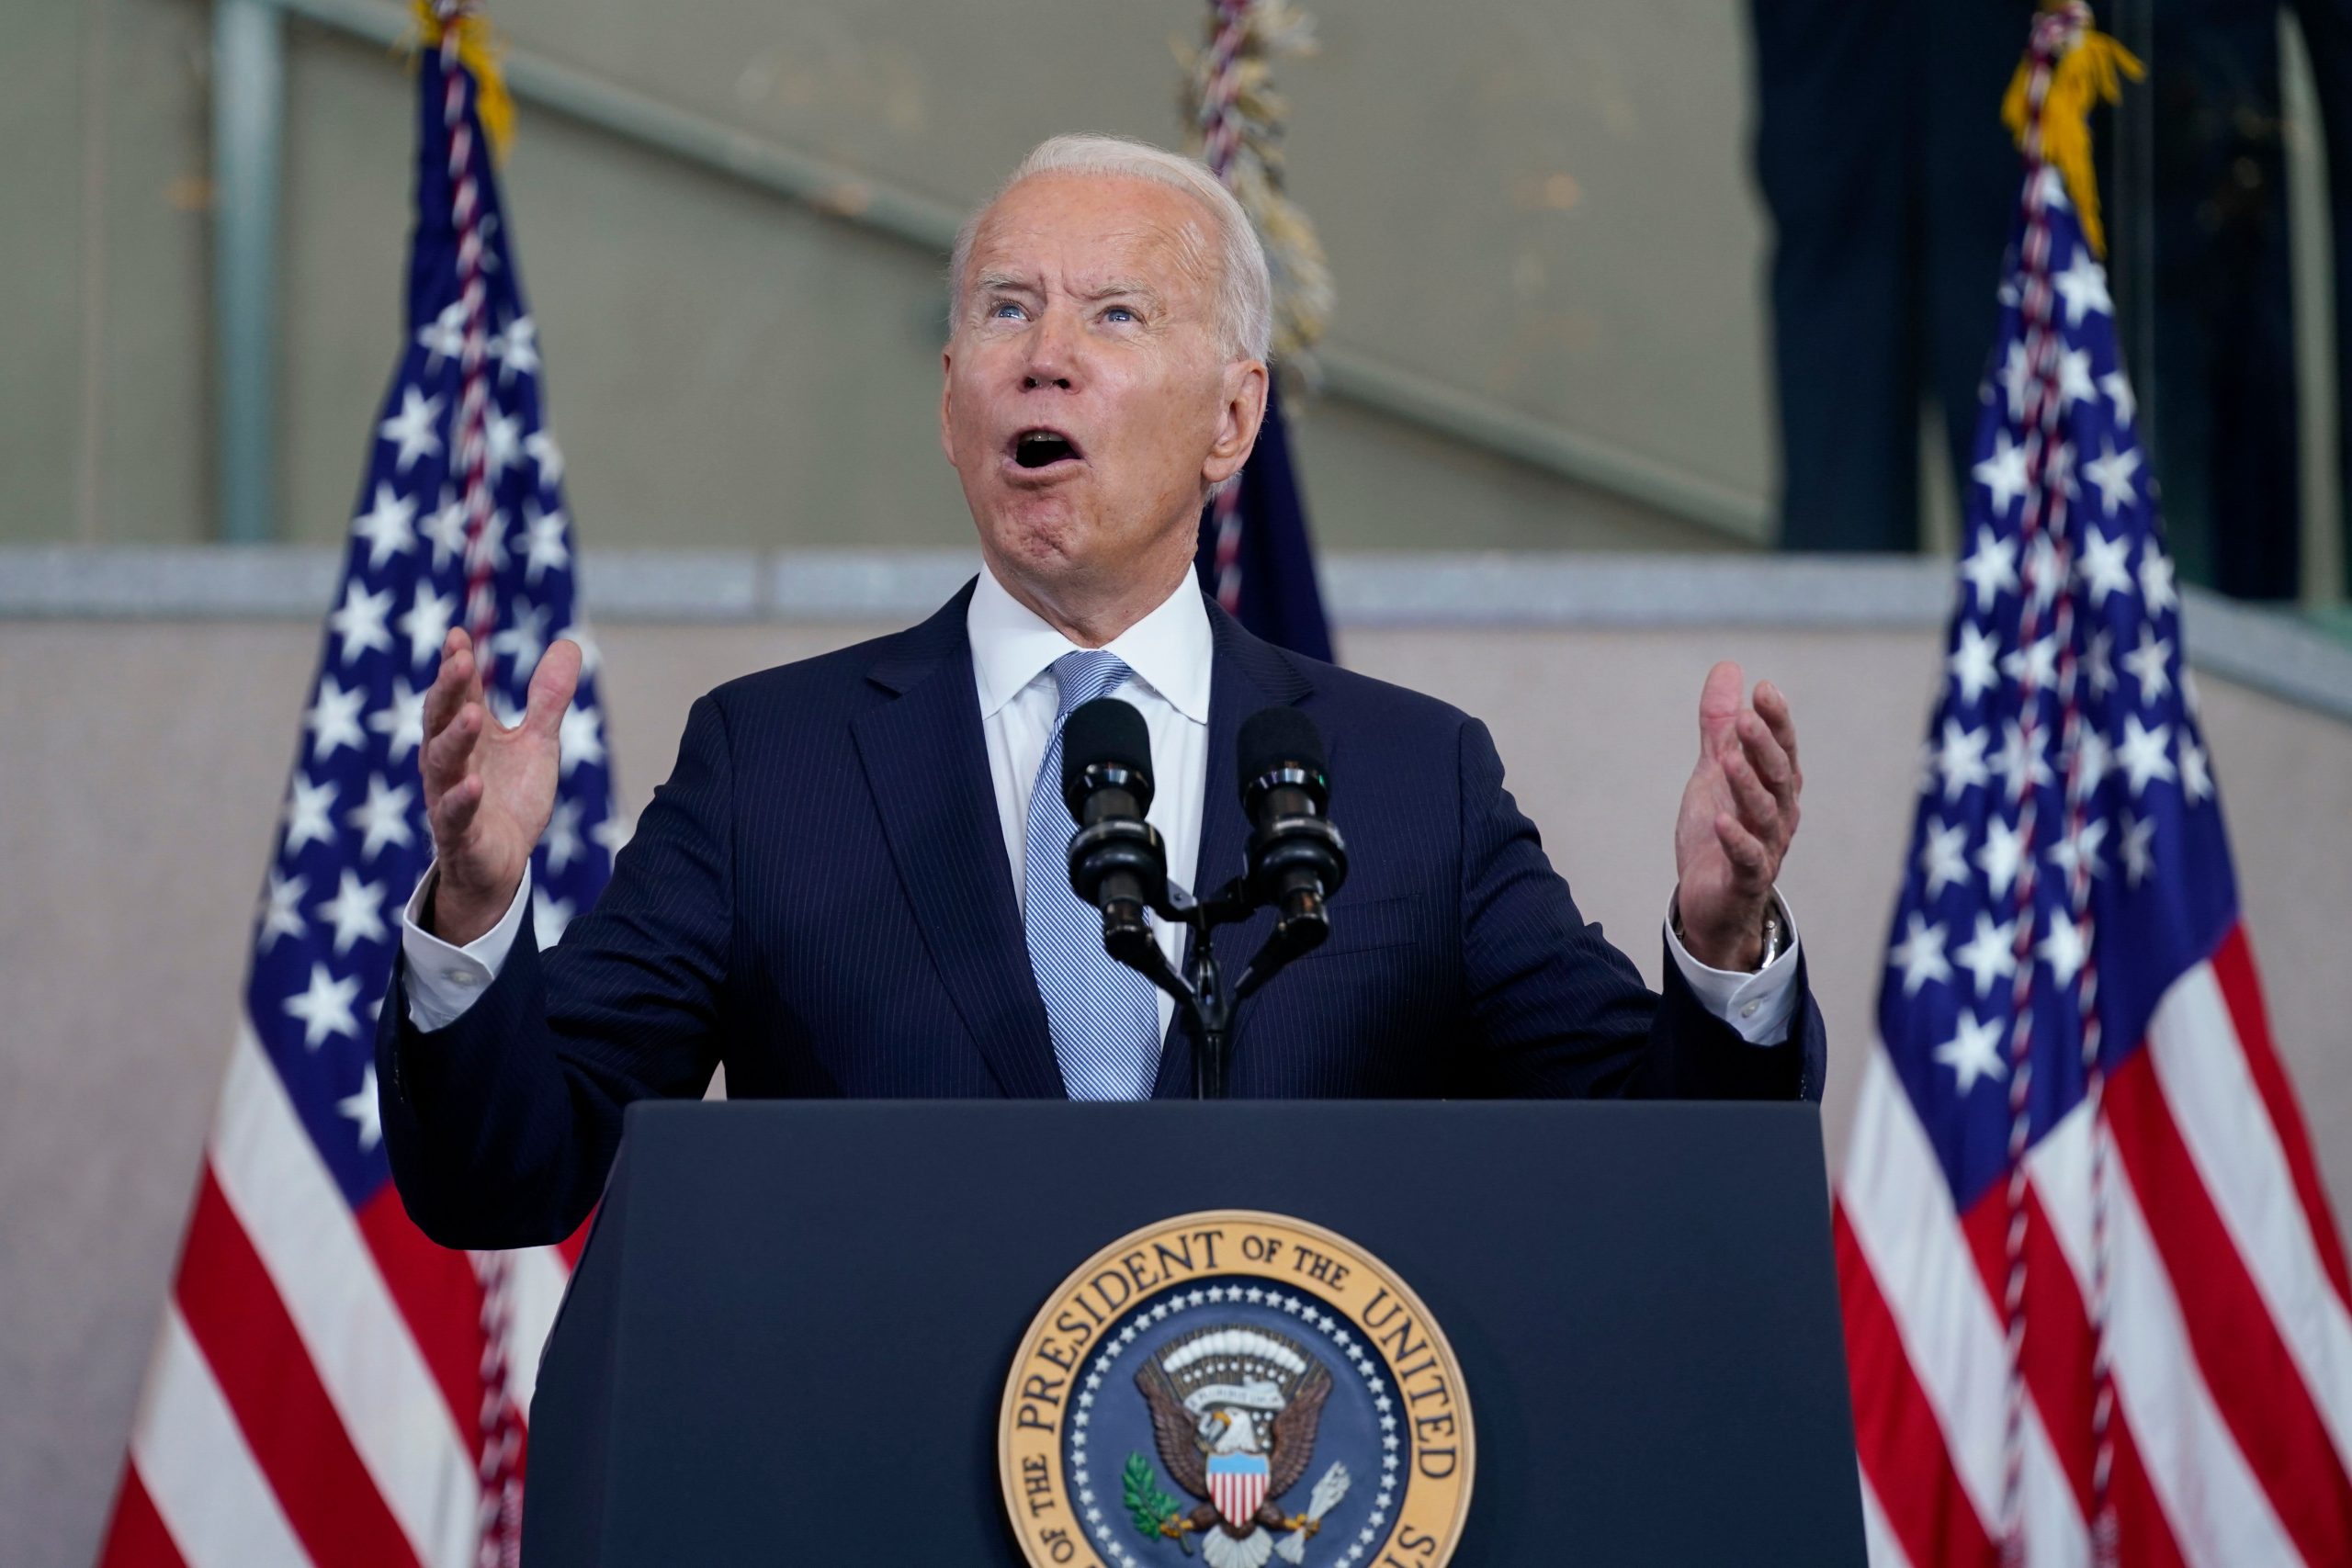 Joe Biden announces new phase in Iraq relations, end of combat operations